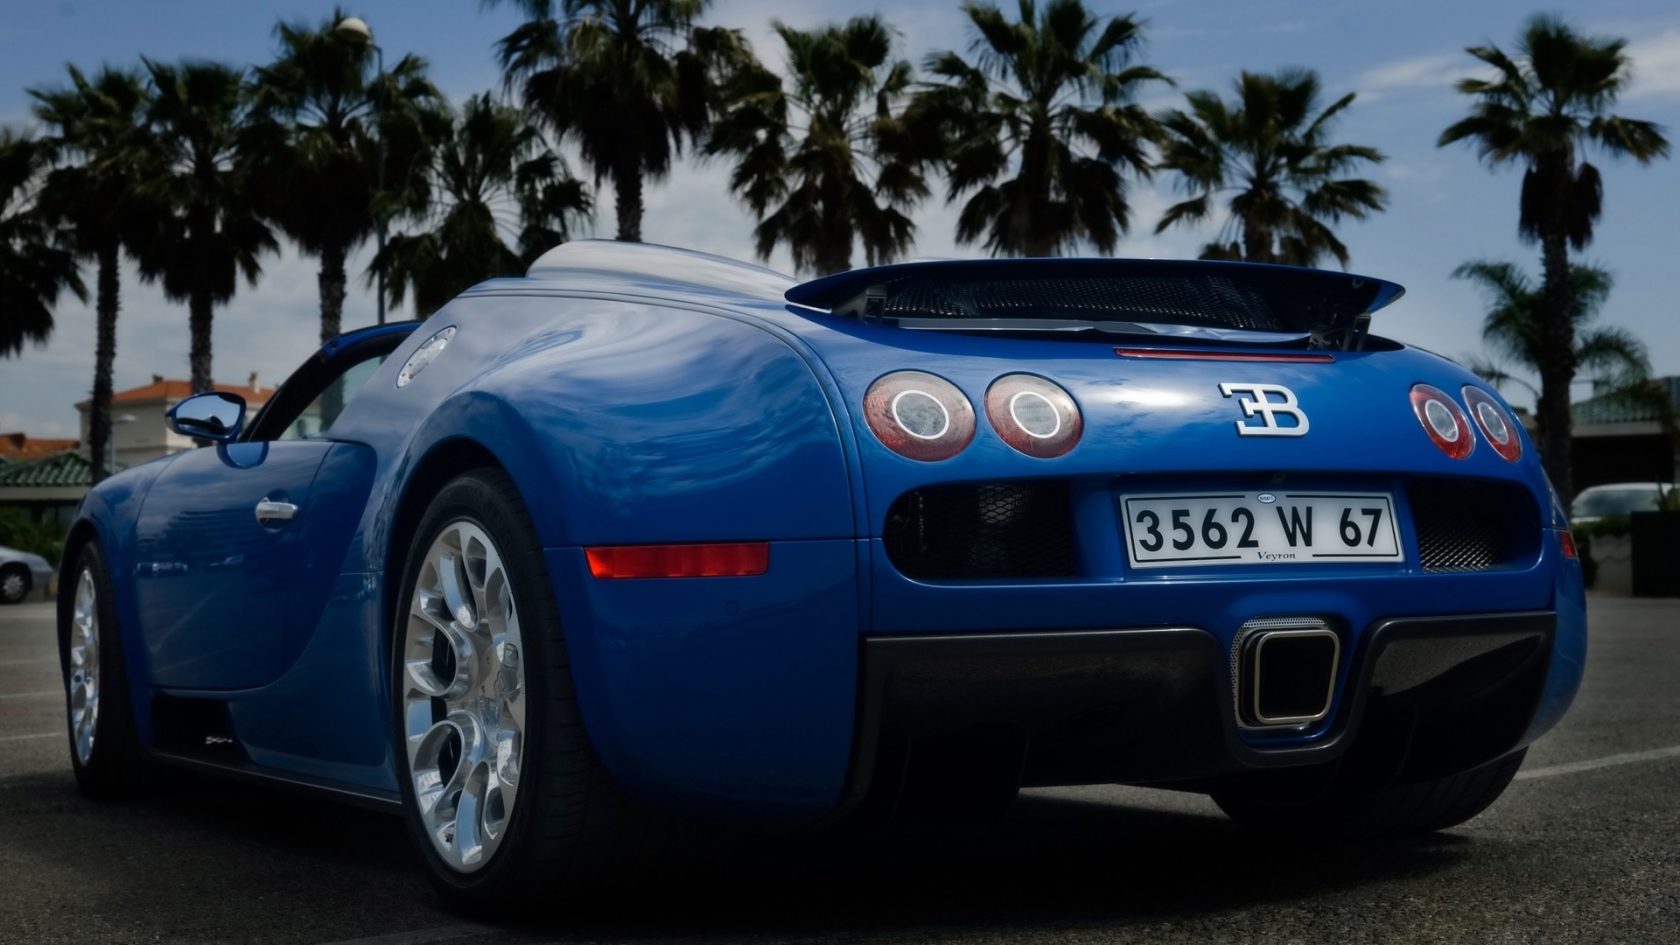 Bugatti Veyron 16.4 Grand Sport 2010 in Cannes - Rear Angle 2 for 1680 x 945 HDTV resolution